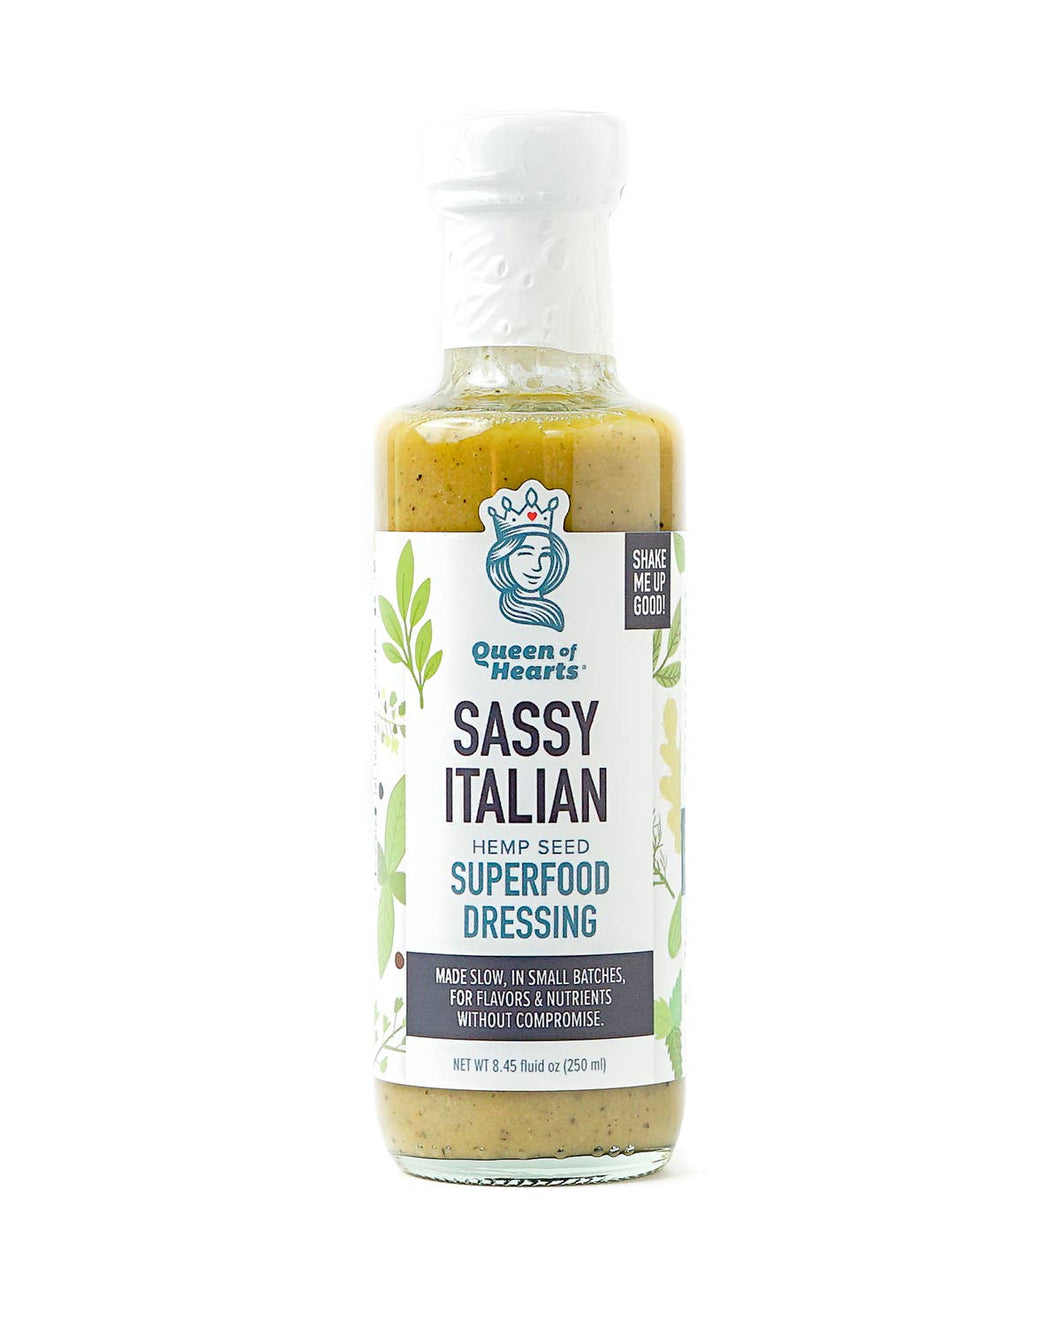 Queen of Hearts - Superfood Dressing - Sassy Italian